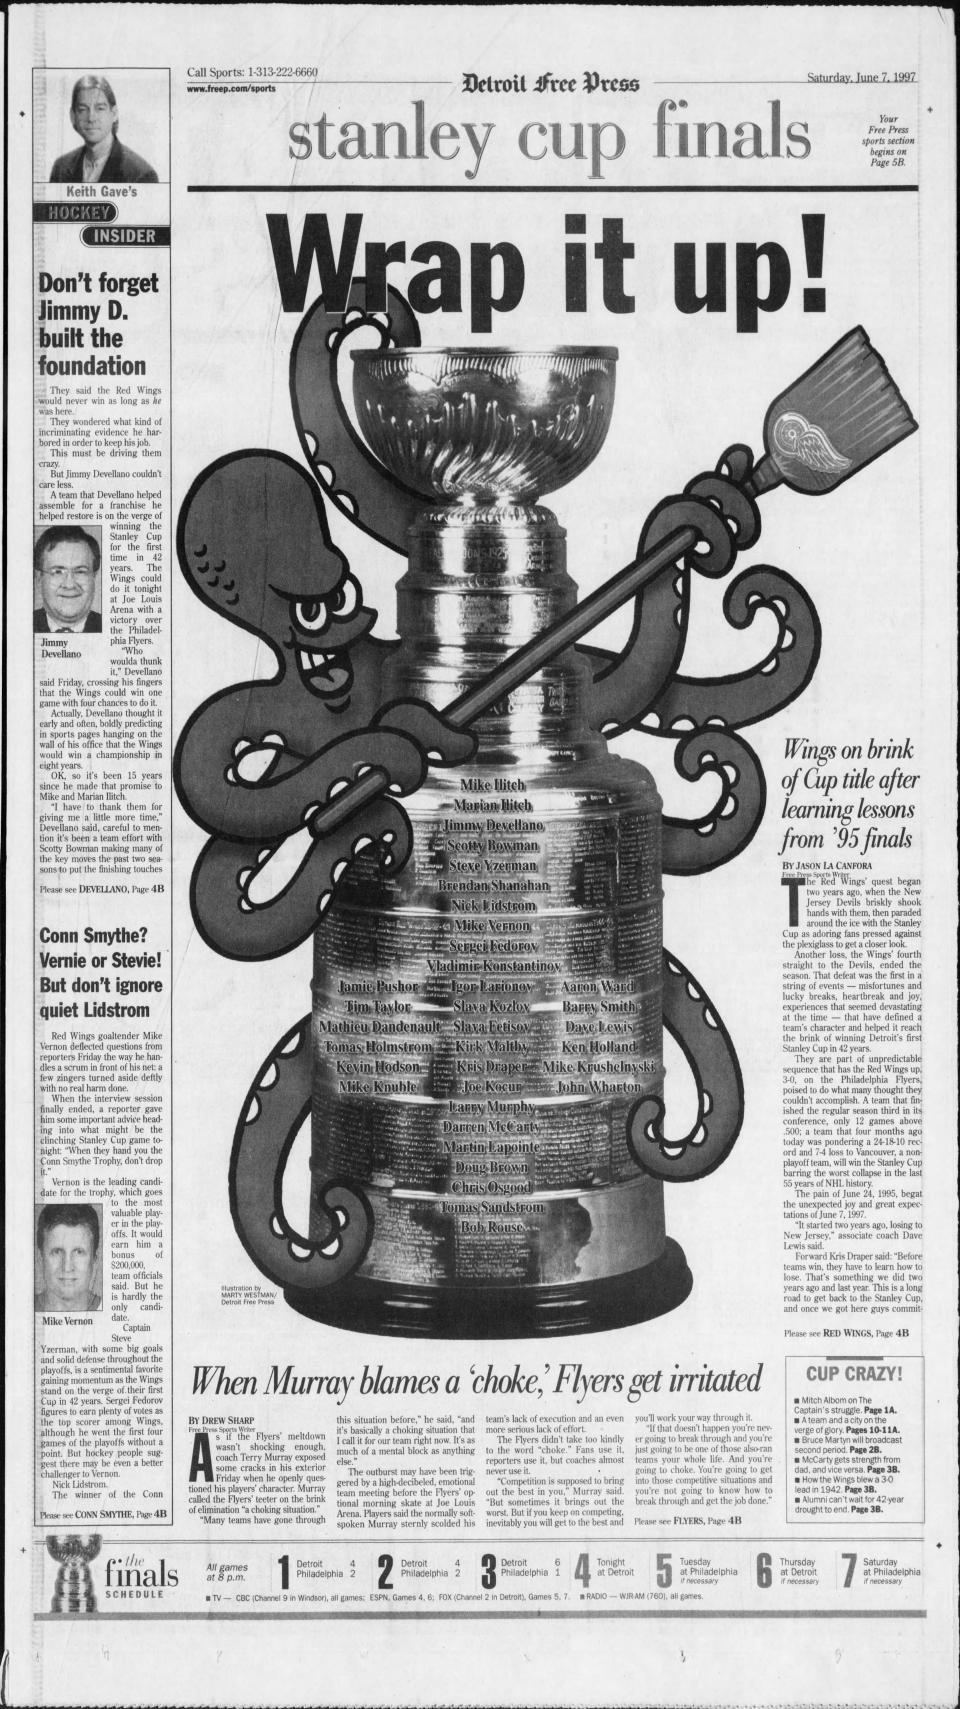 Front of the Detroit Free Press sports section June 7, 1997, leading into the night of Game 4 of the Stanley Cup Finals between the Red Wings and Flyers.